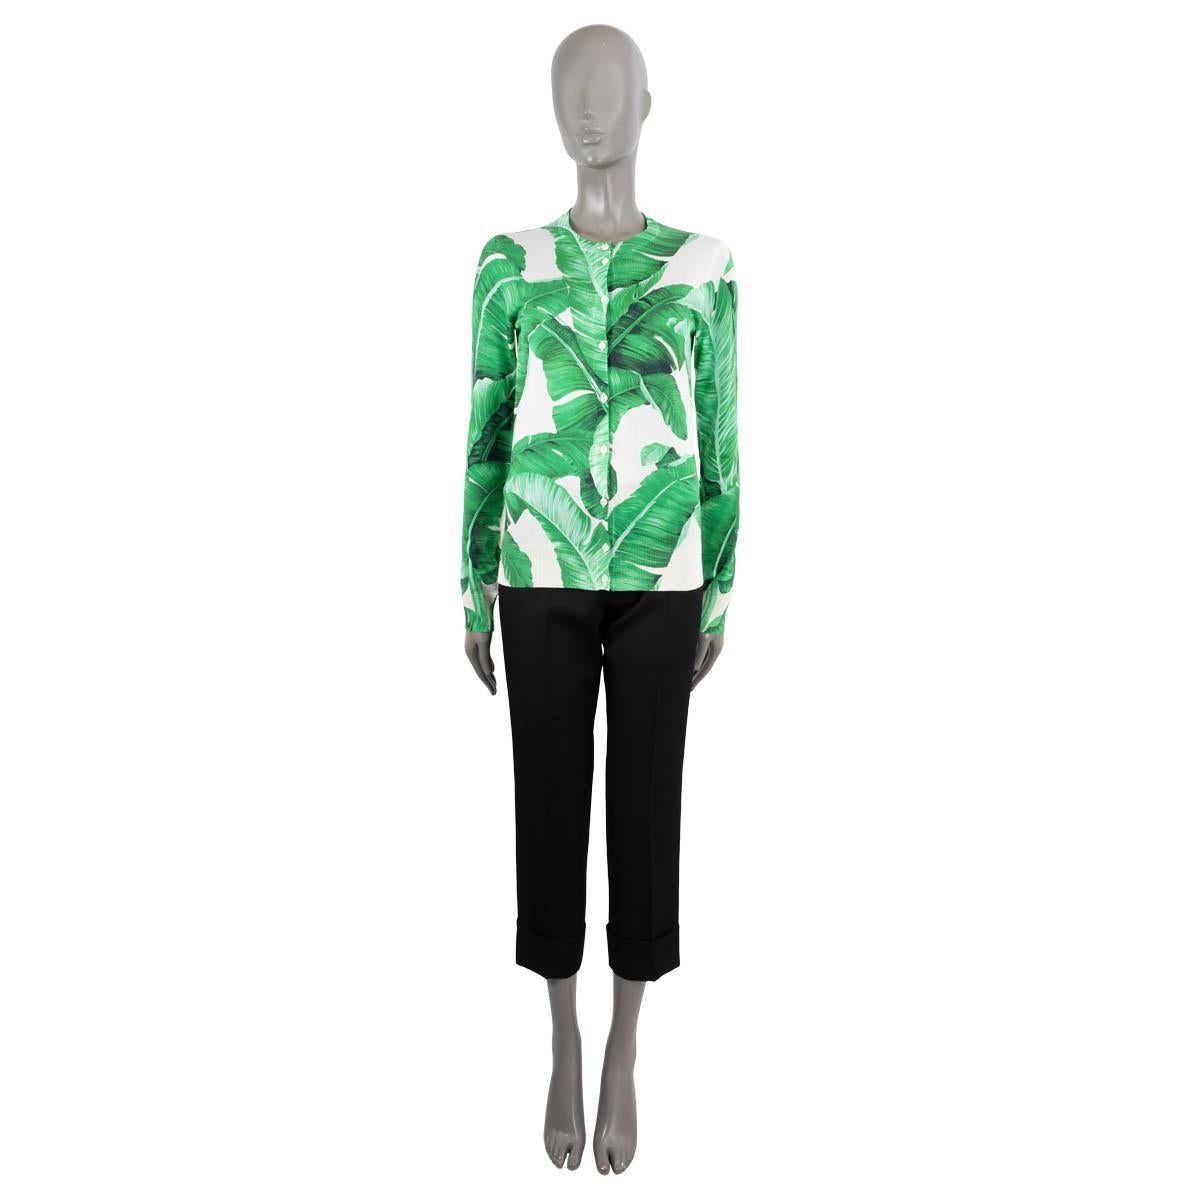 100% authentic Dolce & Gabbana banana leaf print cardigan in green, black and off-white silk (100%). Closes with buttons in the front. Has been worn and is in excellent condition.

2016 Fall/Winter Botanical Garden Collection

Measurements
Tag